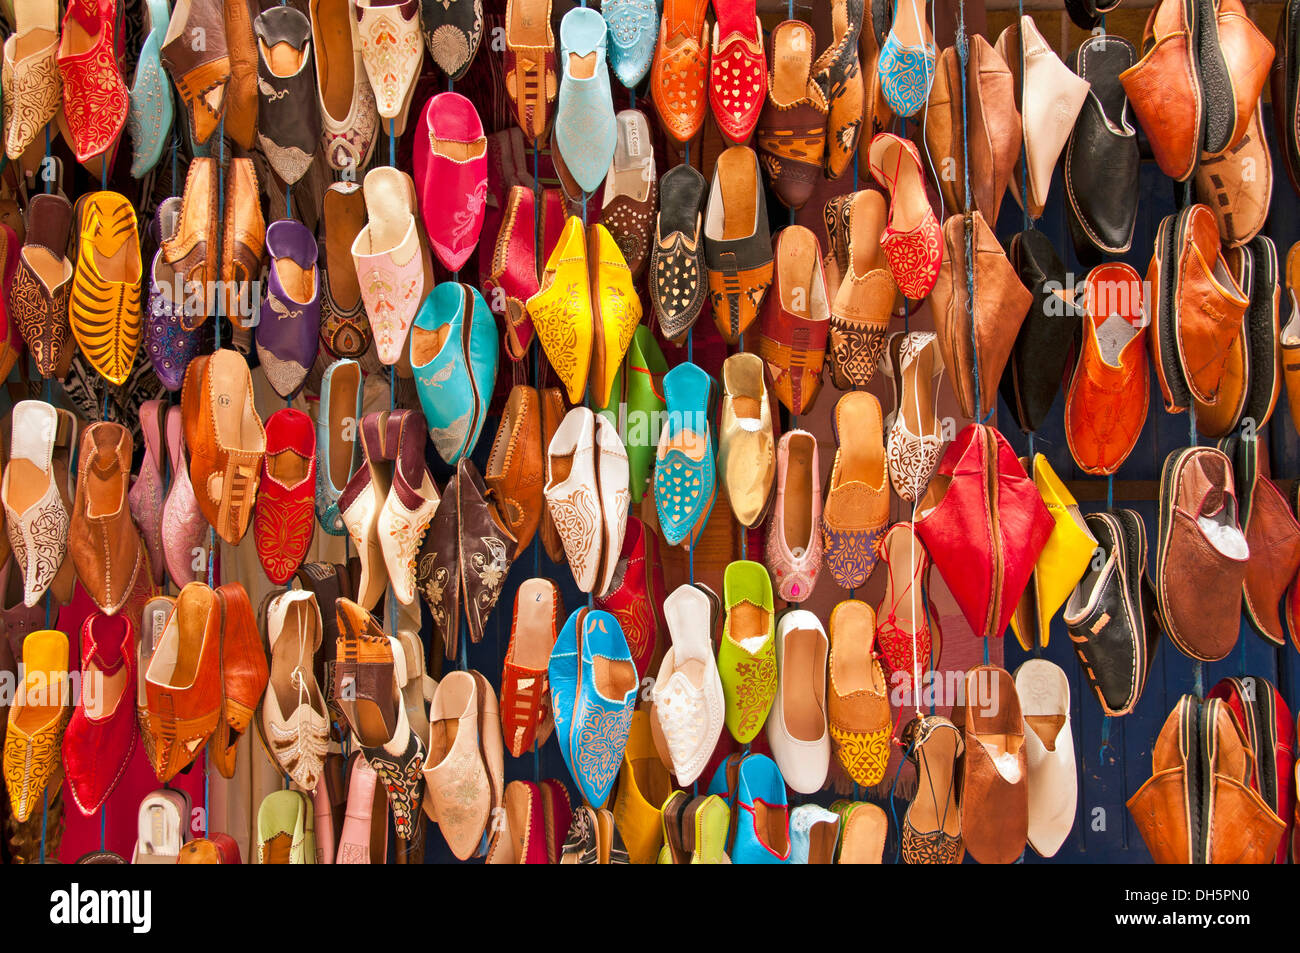 Shoe store, babouches, typical Moroccan slippers, market, souk, Medina, Altstadt, Essaouira, Morocco Stock Photo